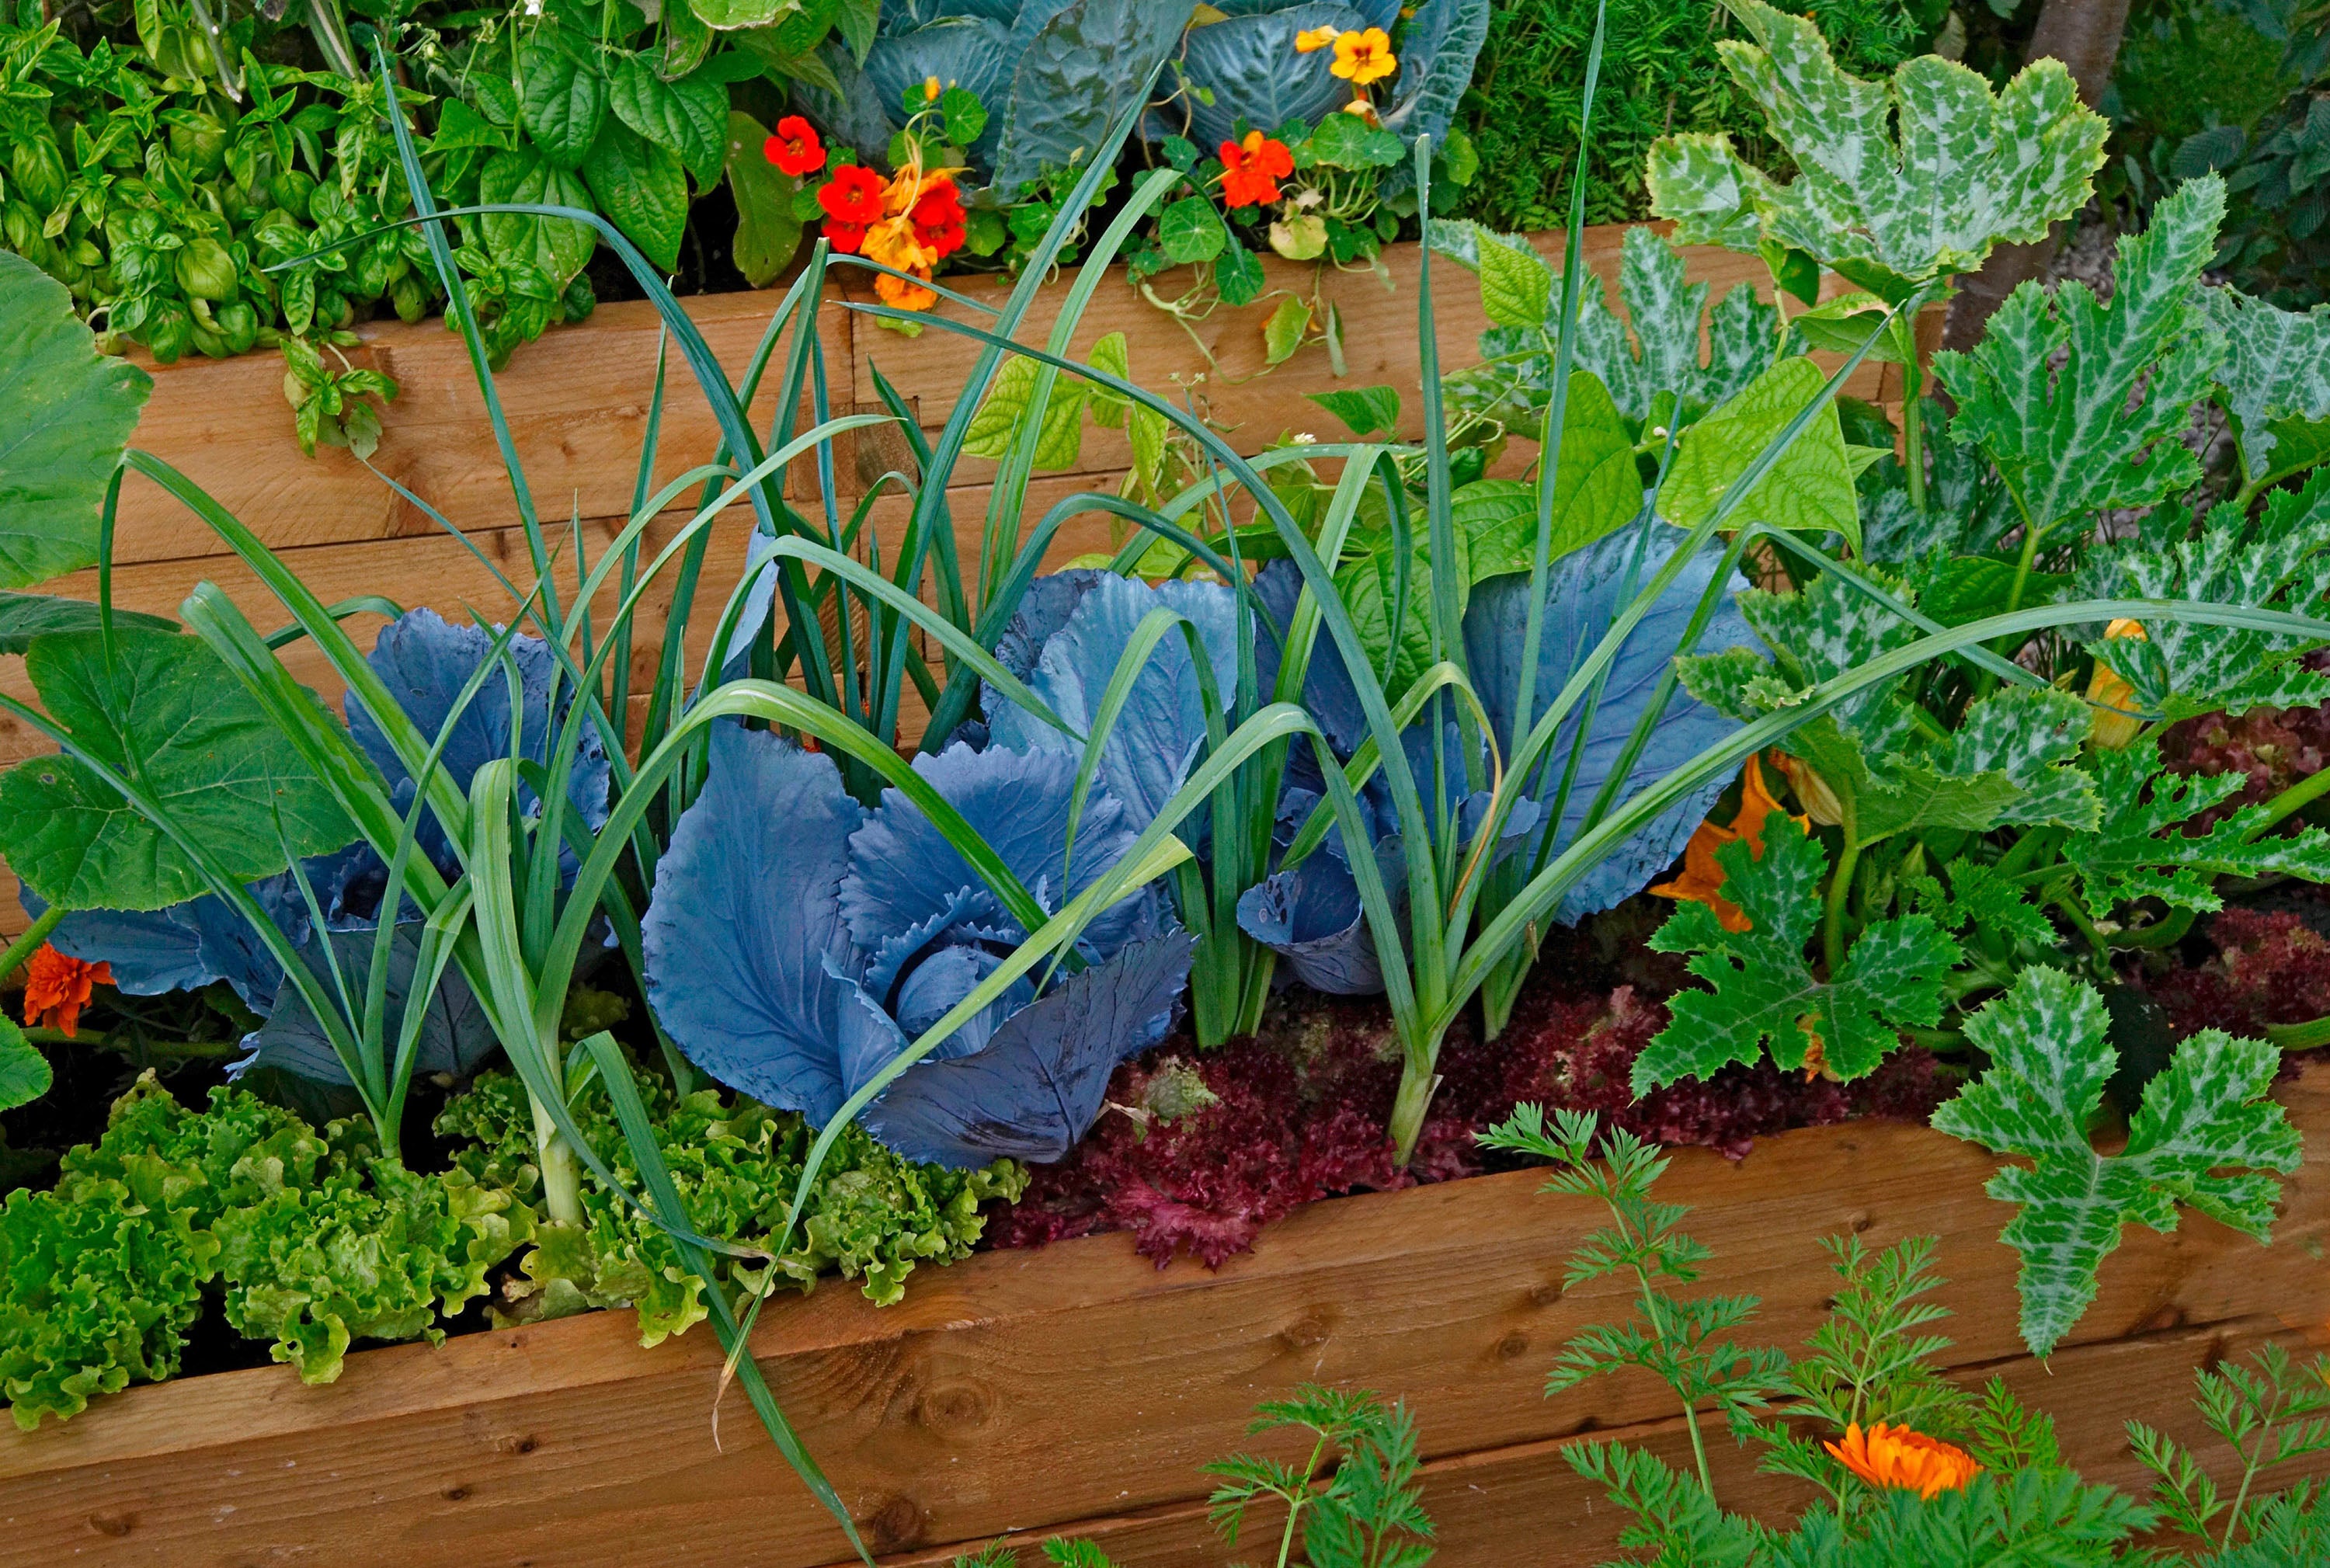 Growing Requirements of Kale: Good and Bad Companion Plants of Kale